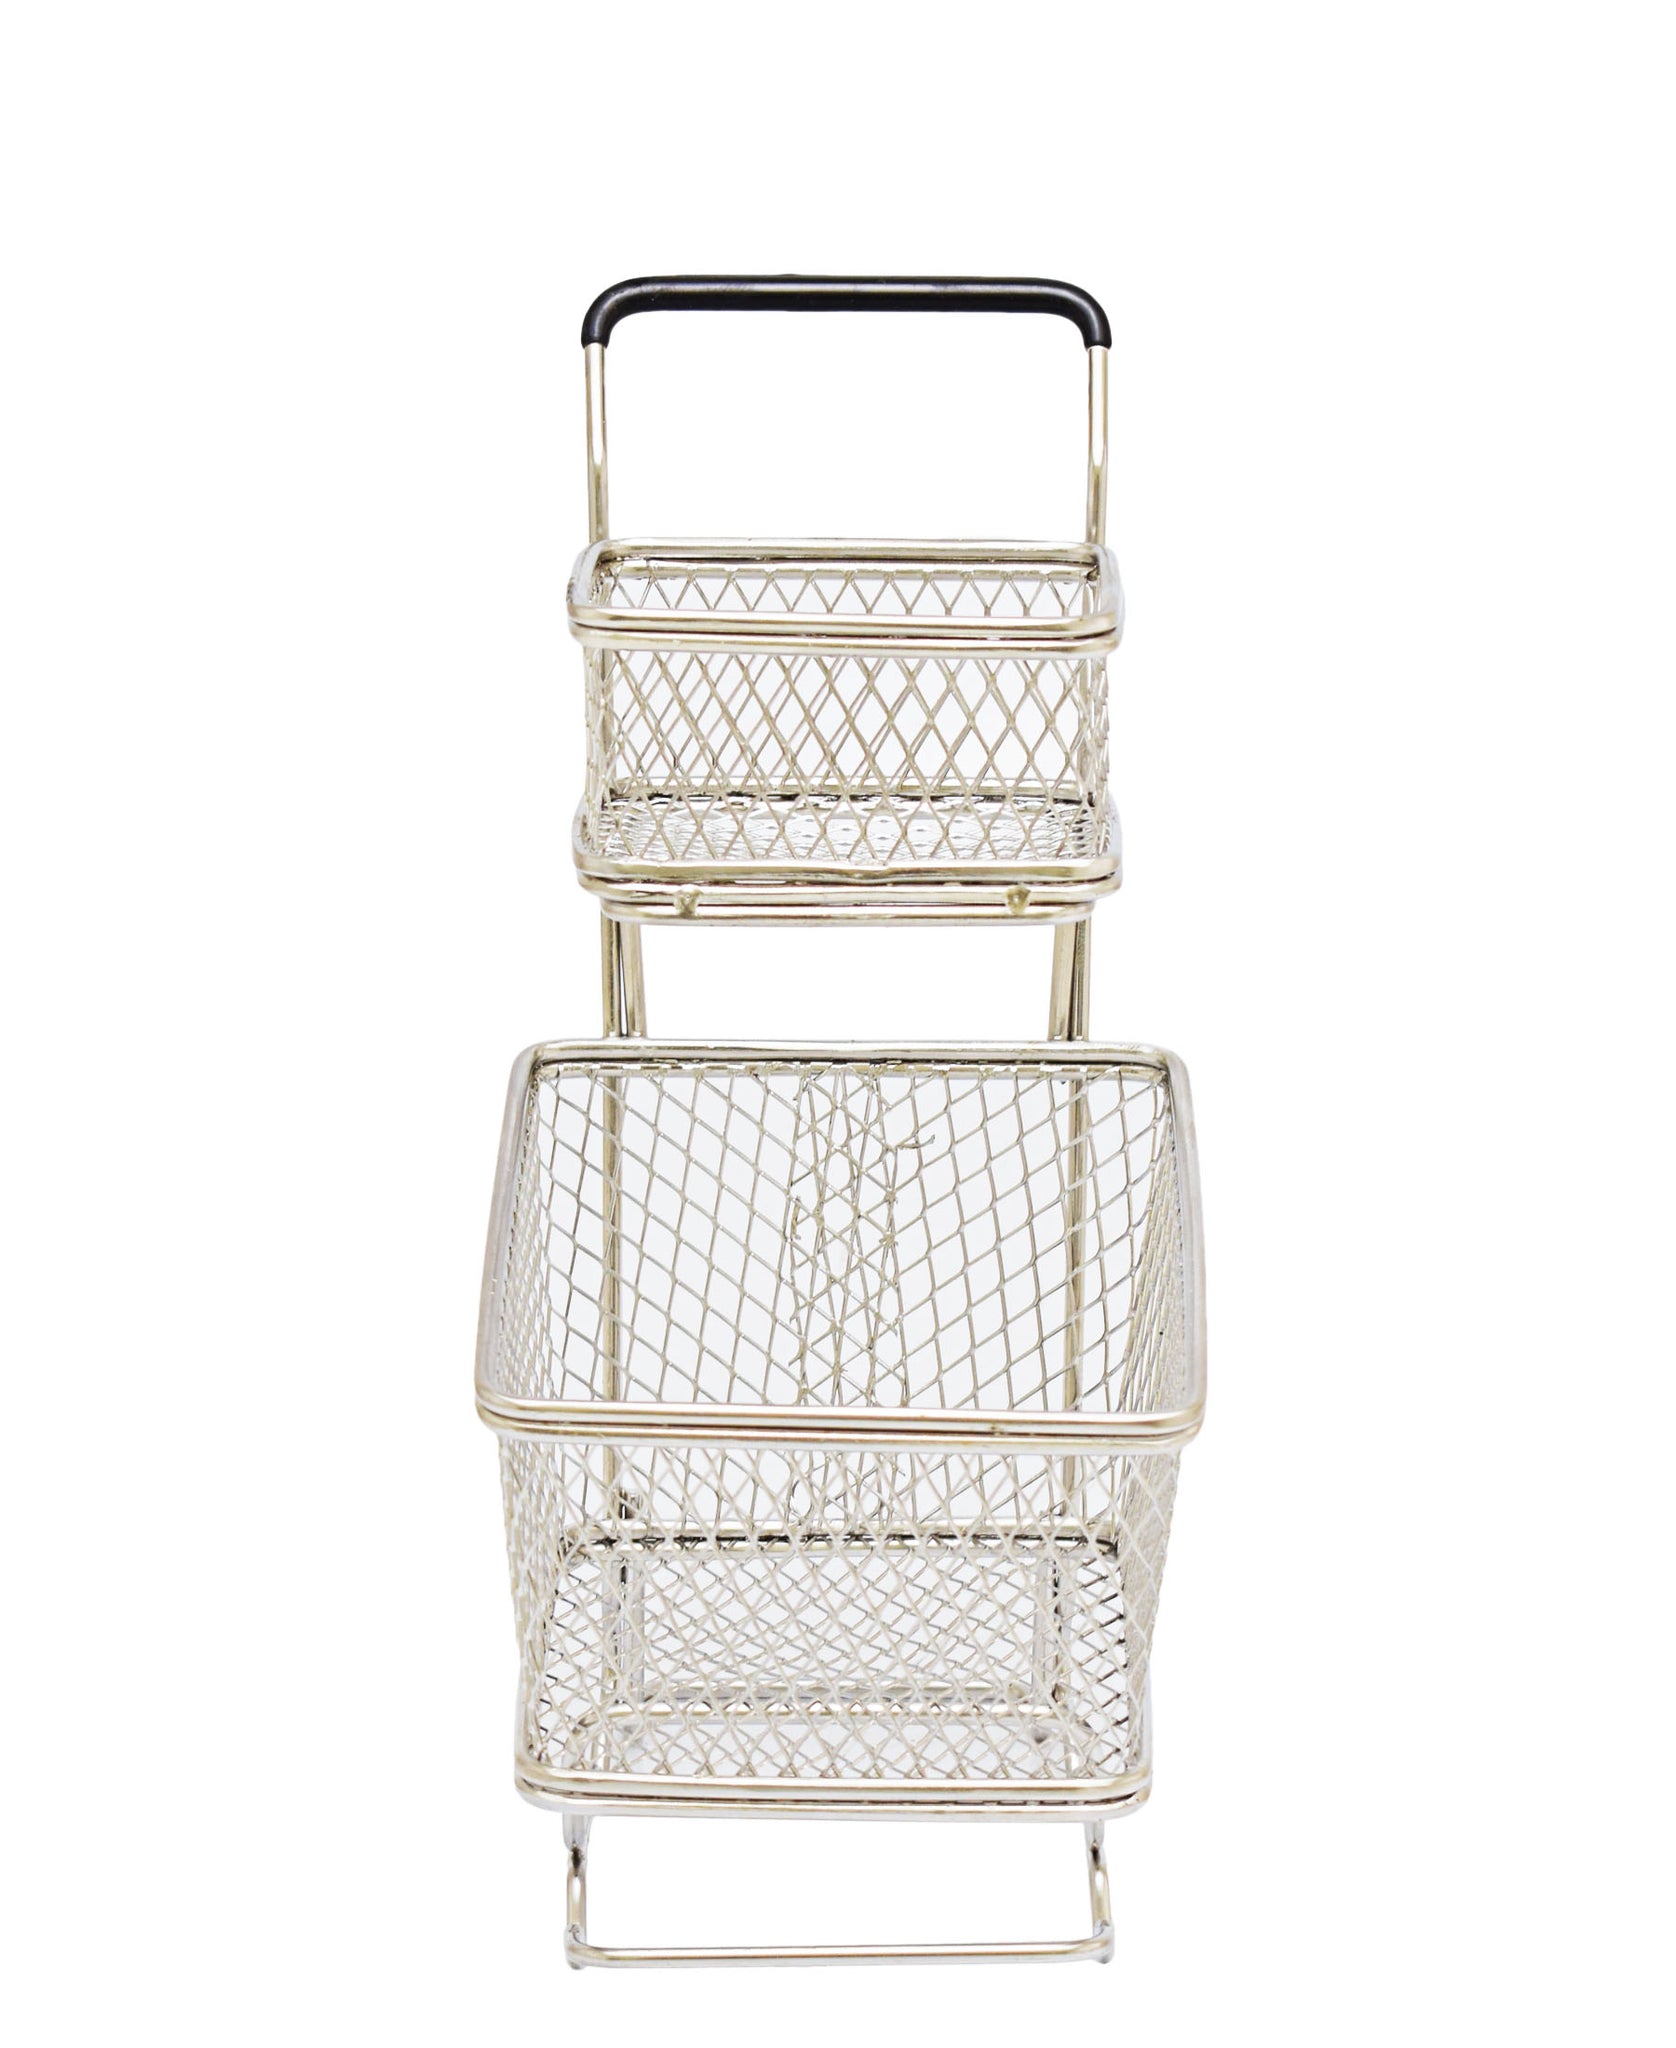 Kitchen Life Double Basket Shopping Trolley - Gold